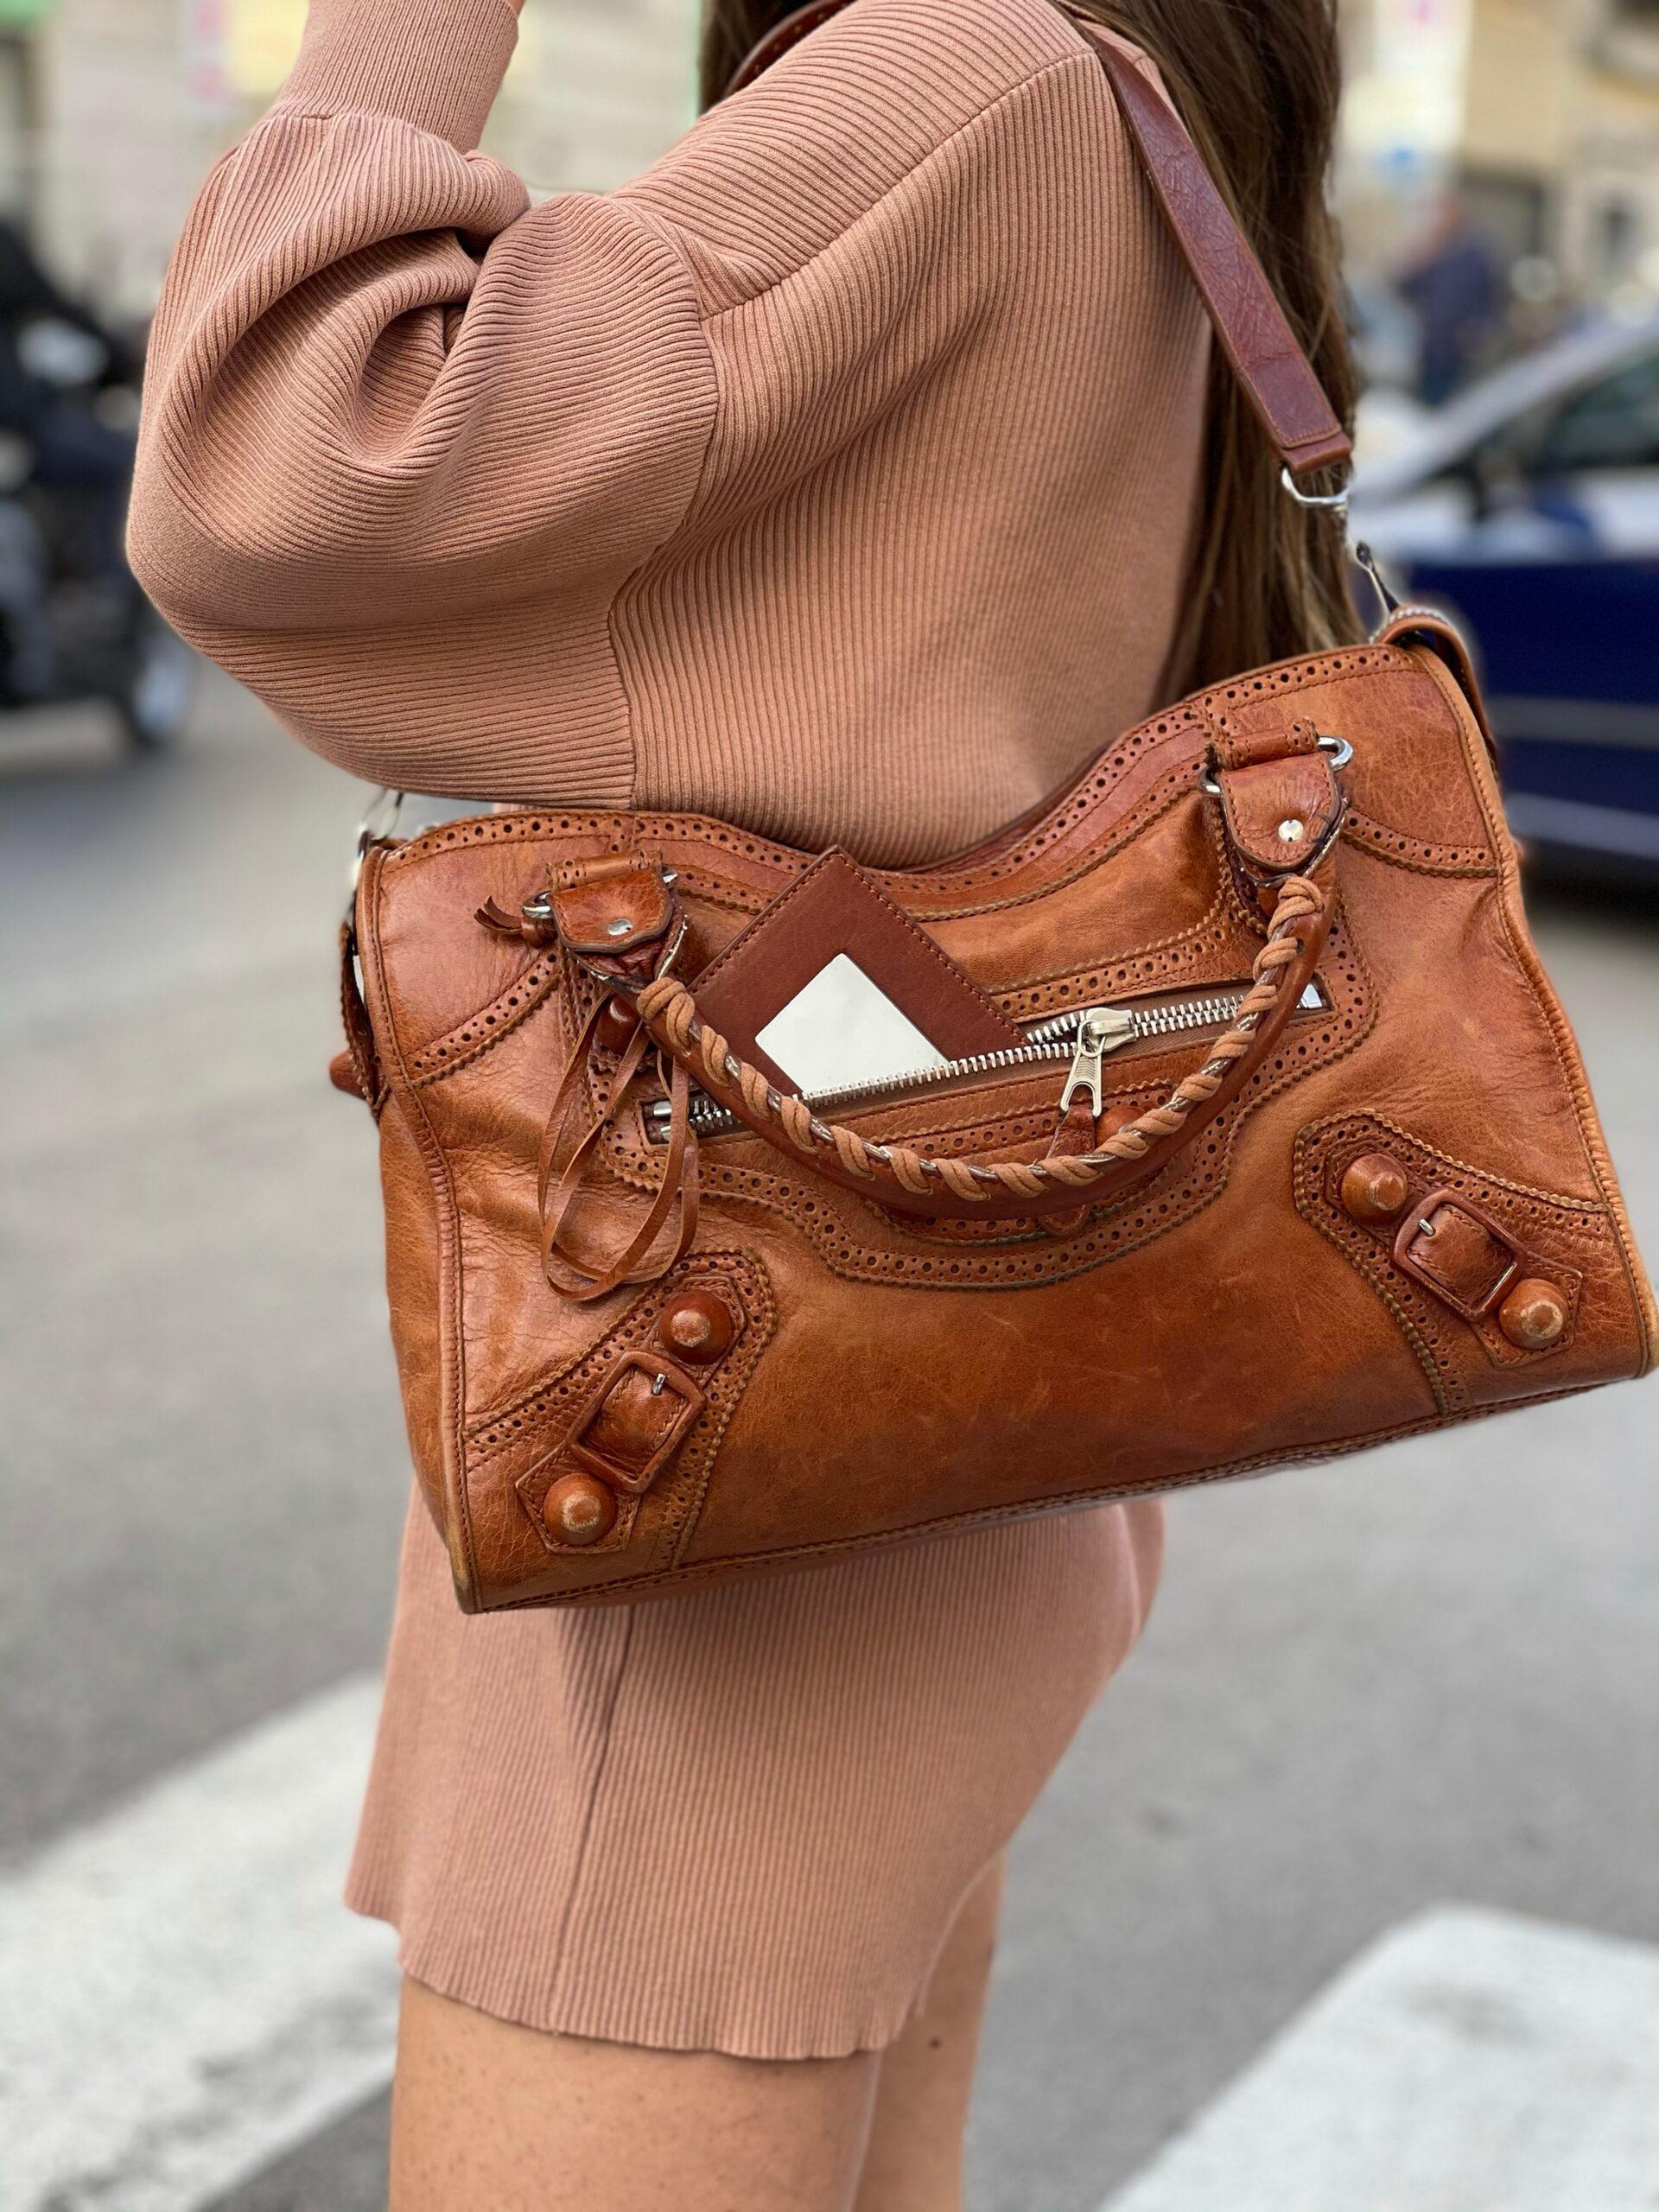 Balenciaga City crafted in brown leather with silver hardware.

Medium size, zip closure.Equipped with double handle and shoulder strap, internally quite roomy.

The bag has some signs of wear, but overall it is in good condition.

Dimensions: 18 ×